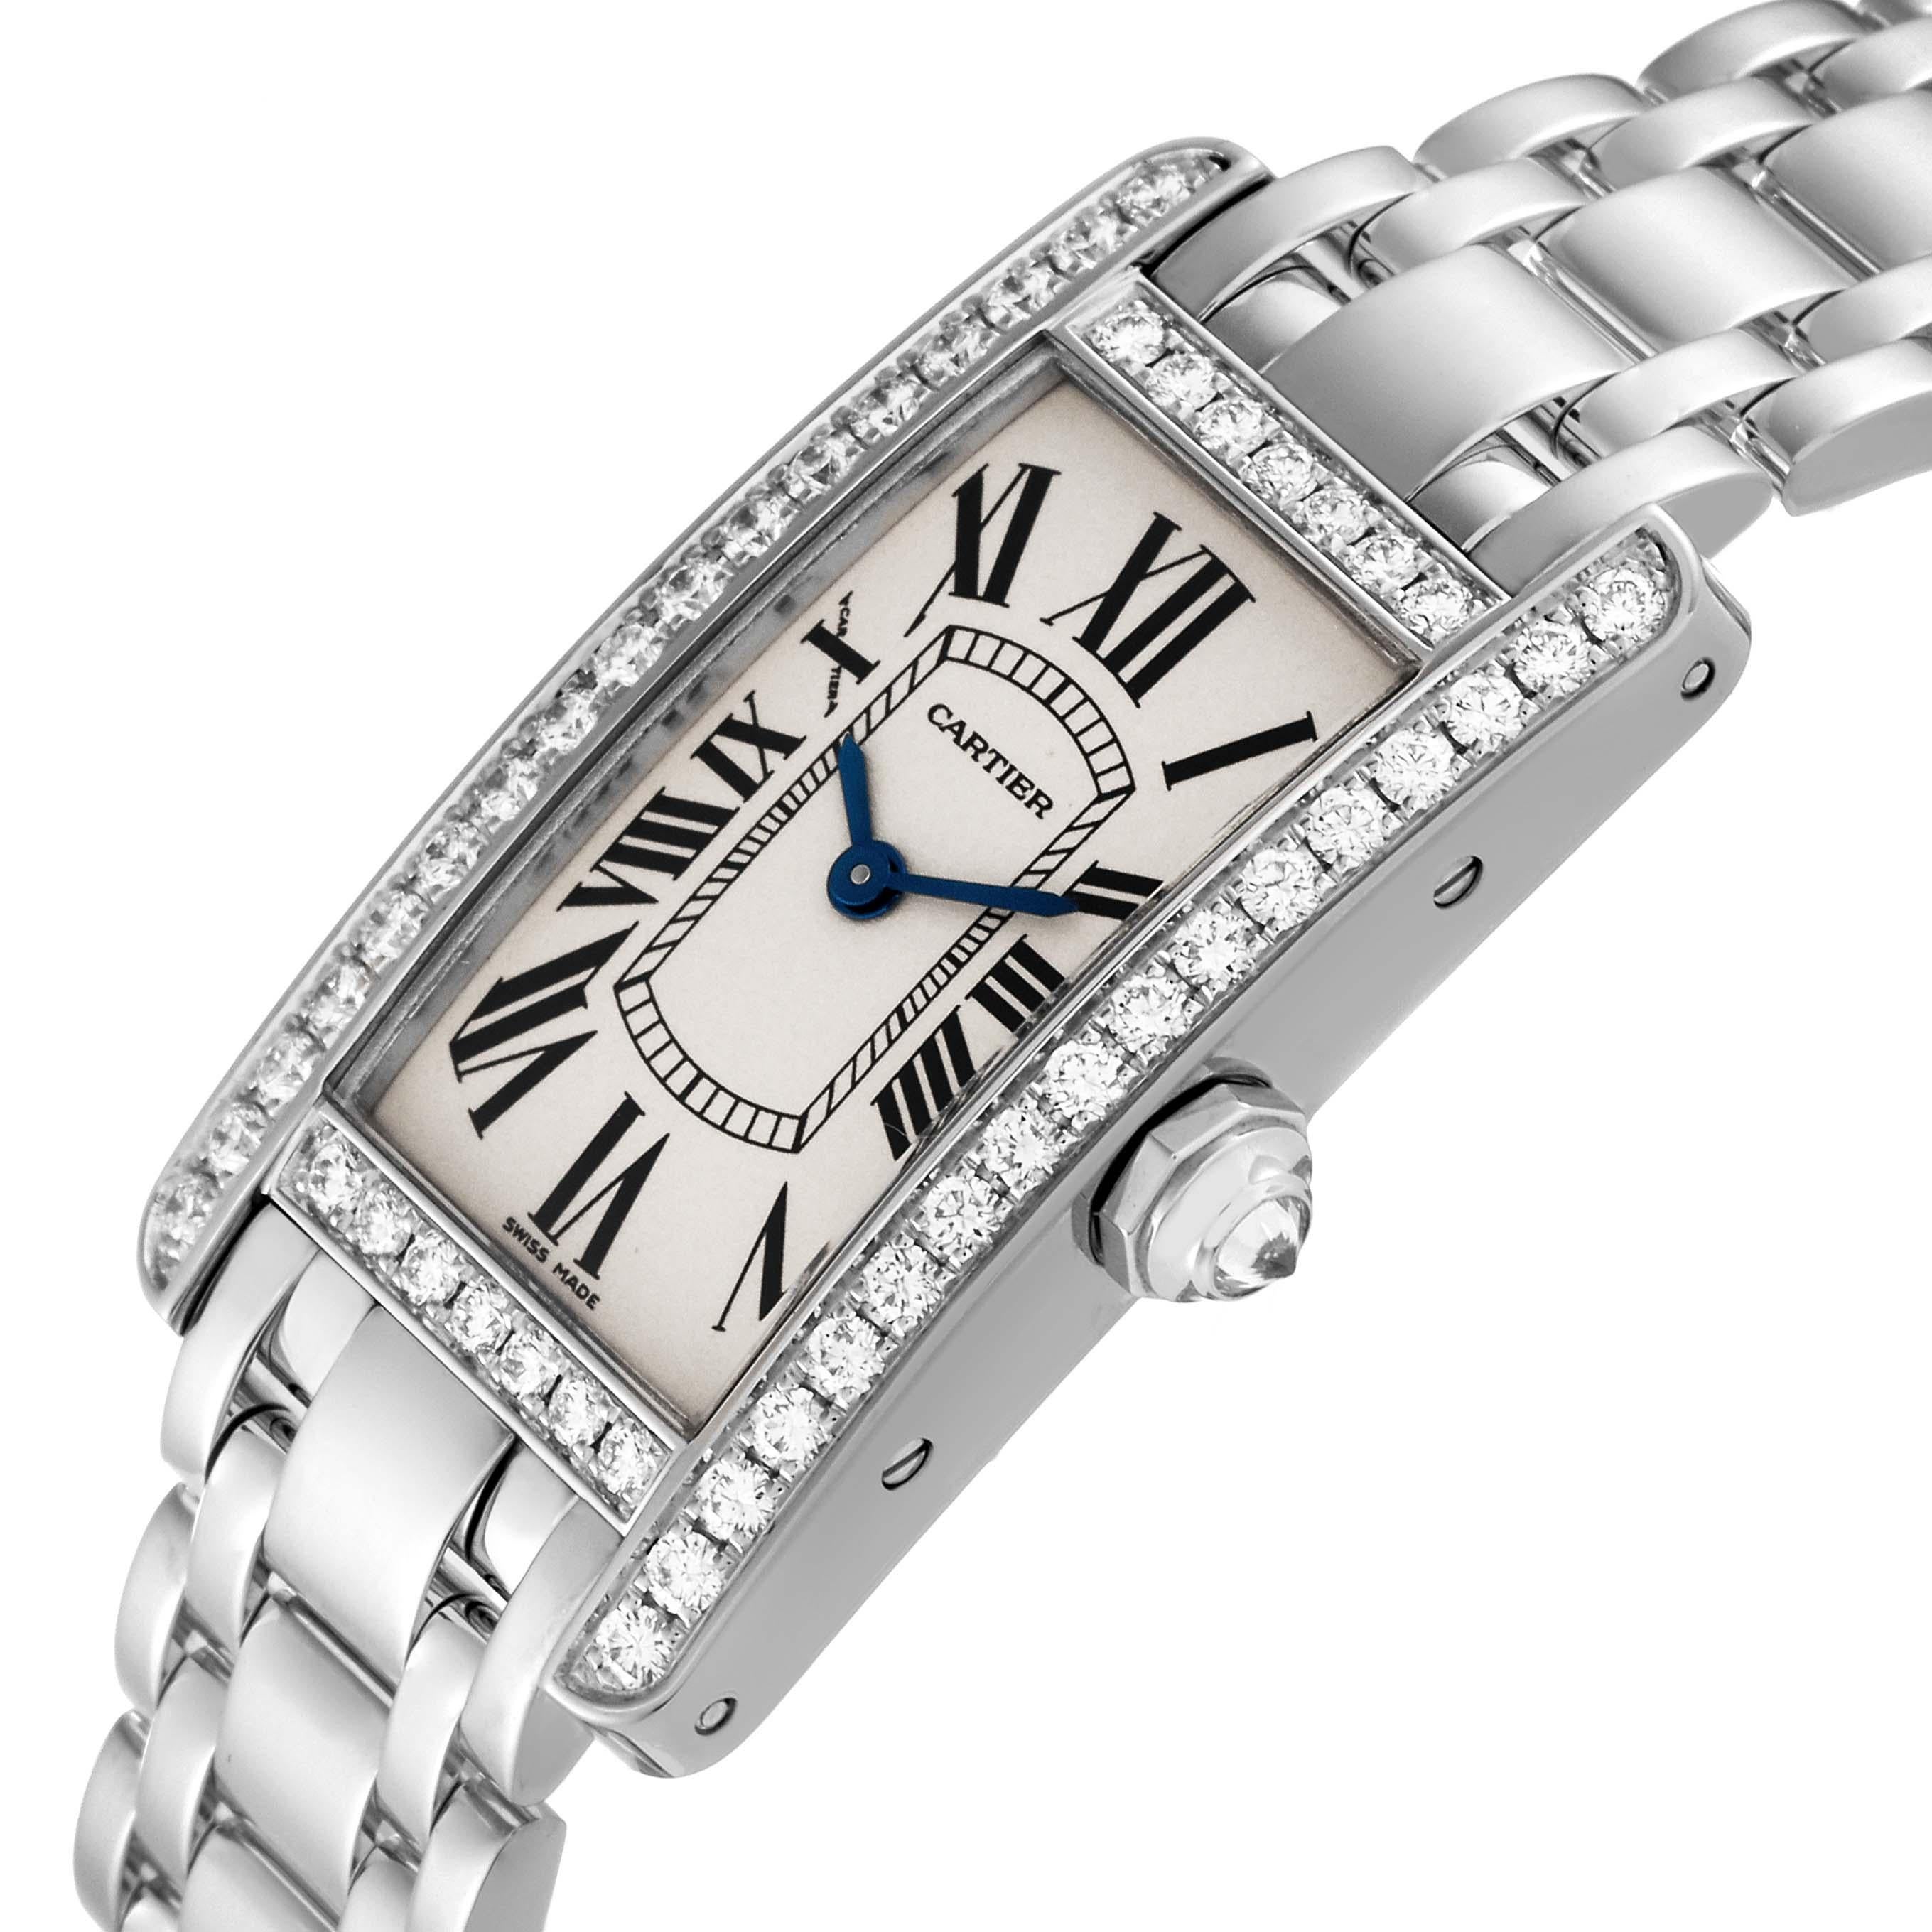 Cartier Tank Americaine White Gold Diamond Ladies Watch WB7073L1 Box Papers 5